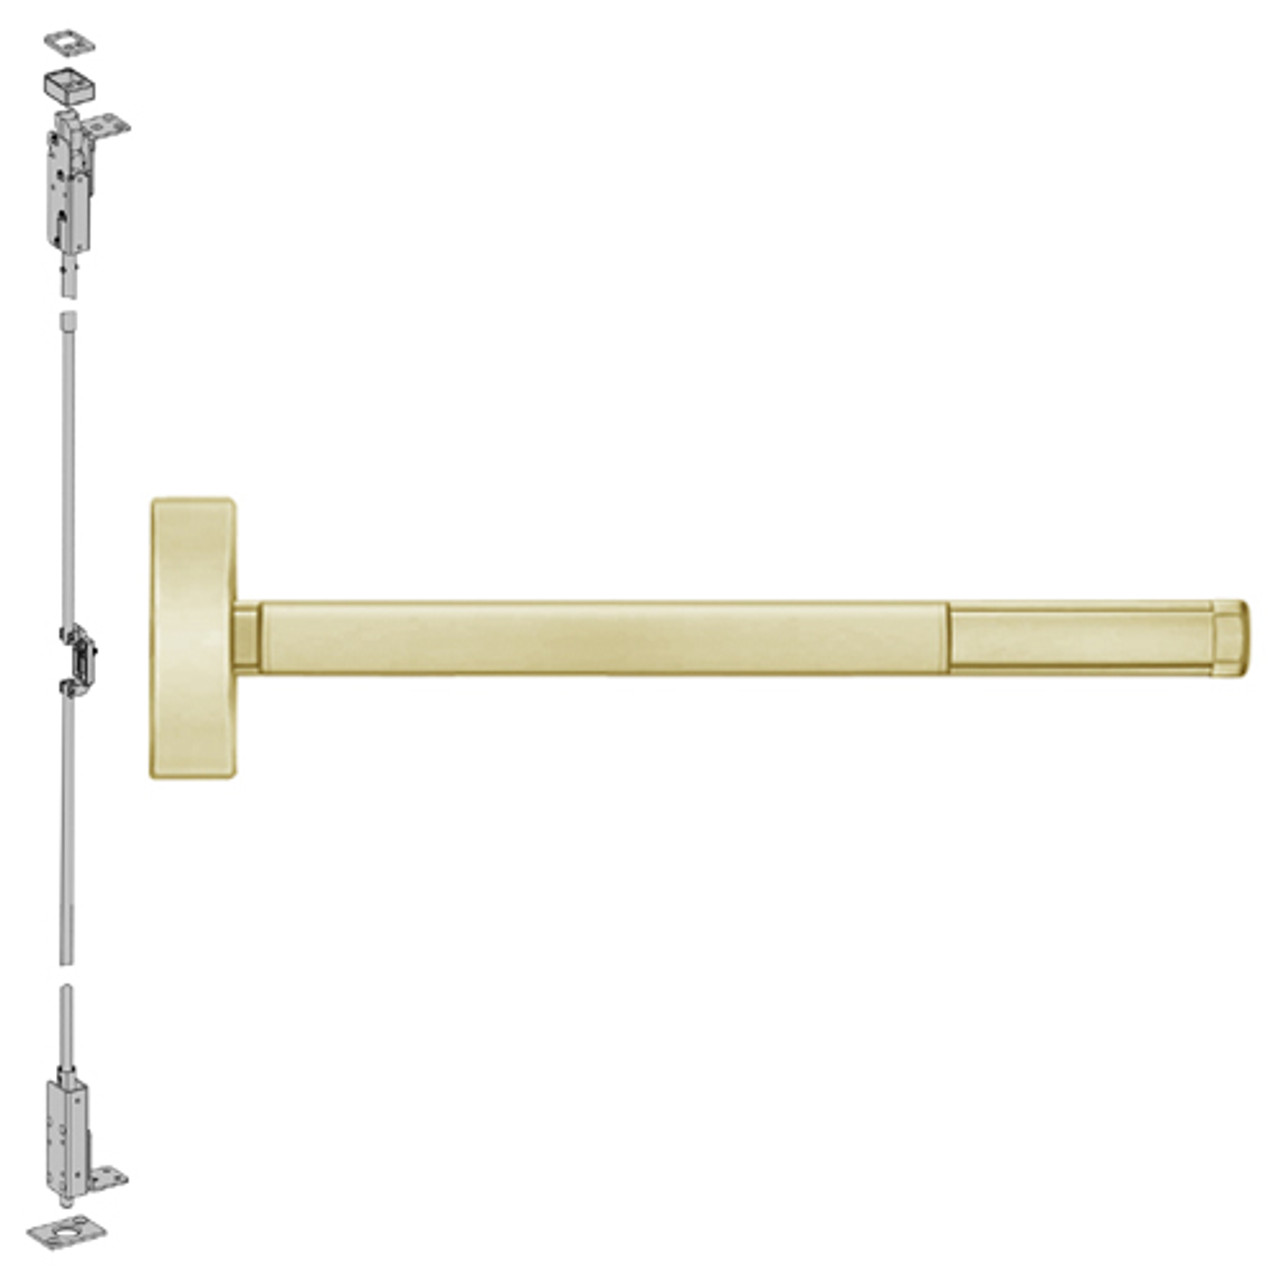 DE2708-606-48 PHI 2700 Series Non Fire Rated Wood Door Concealed Vertical Exit Device Prepped for Key Controls Lever-Knob in Satin Brass Finish